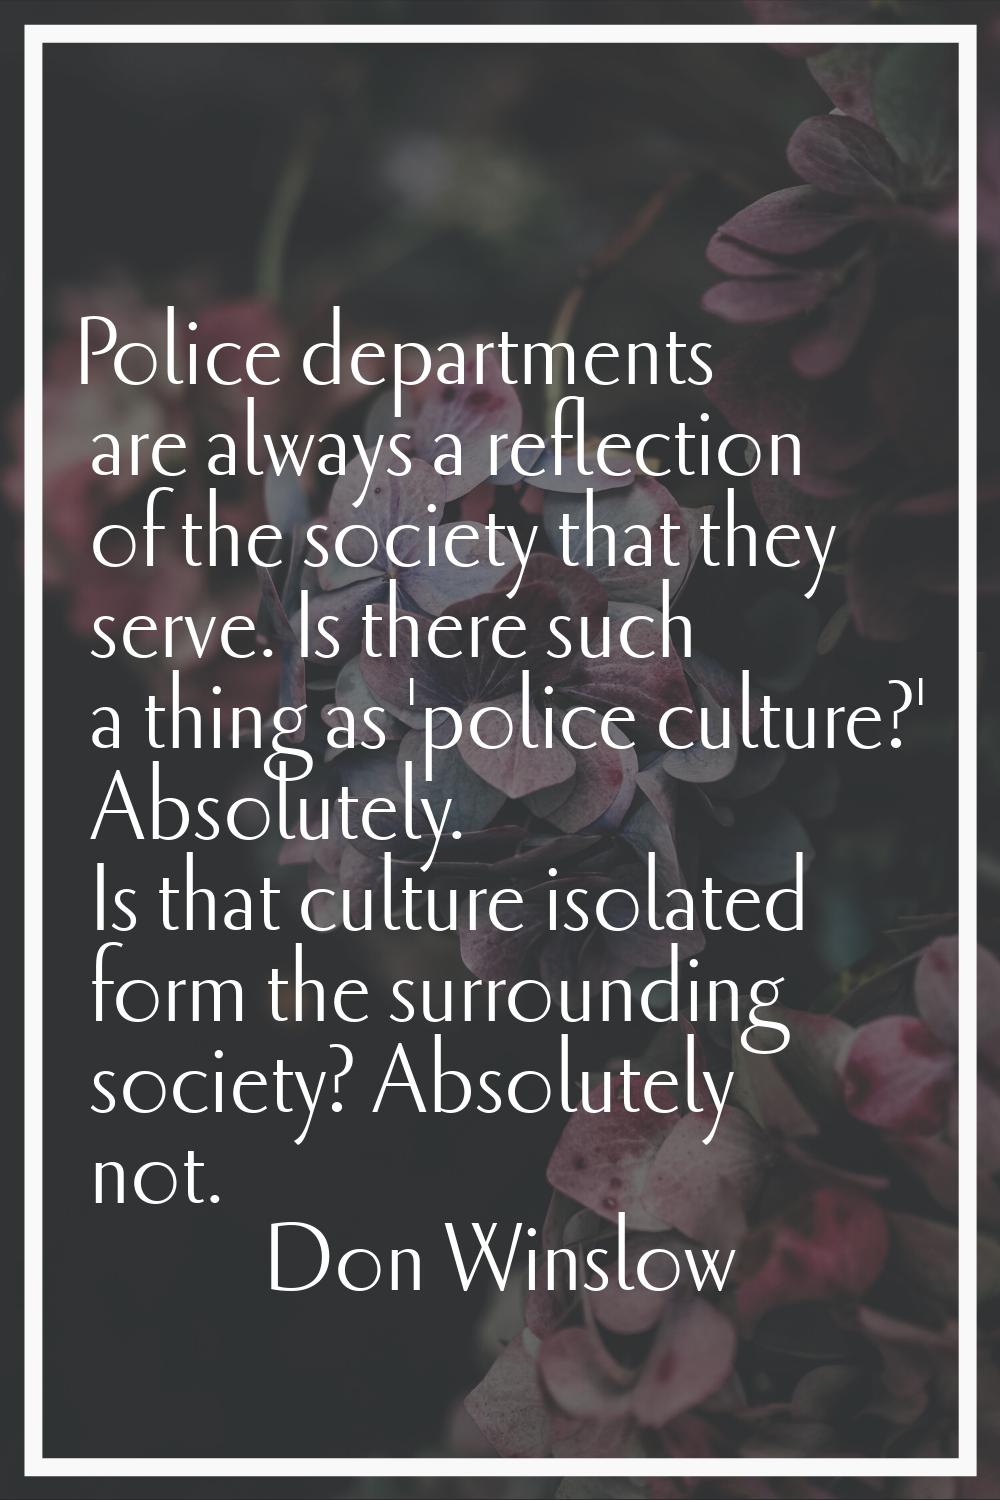 Police departments are always a reflection of the society that they serve. Is there such a thing as